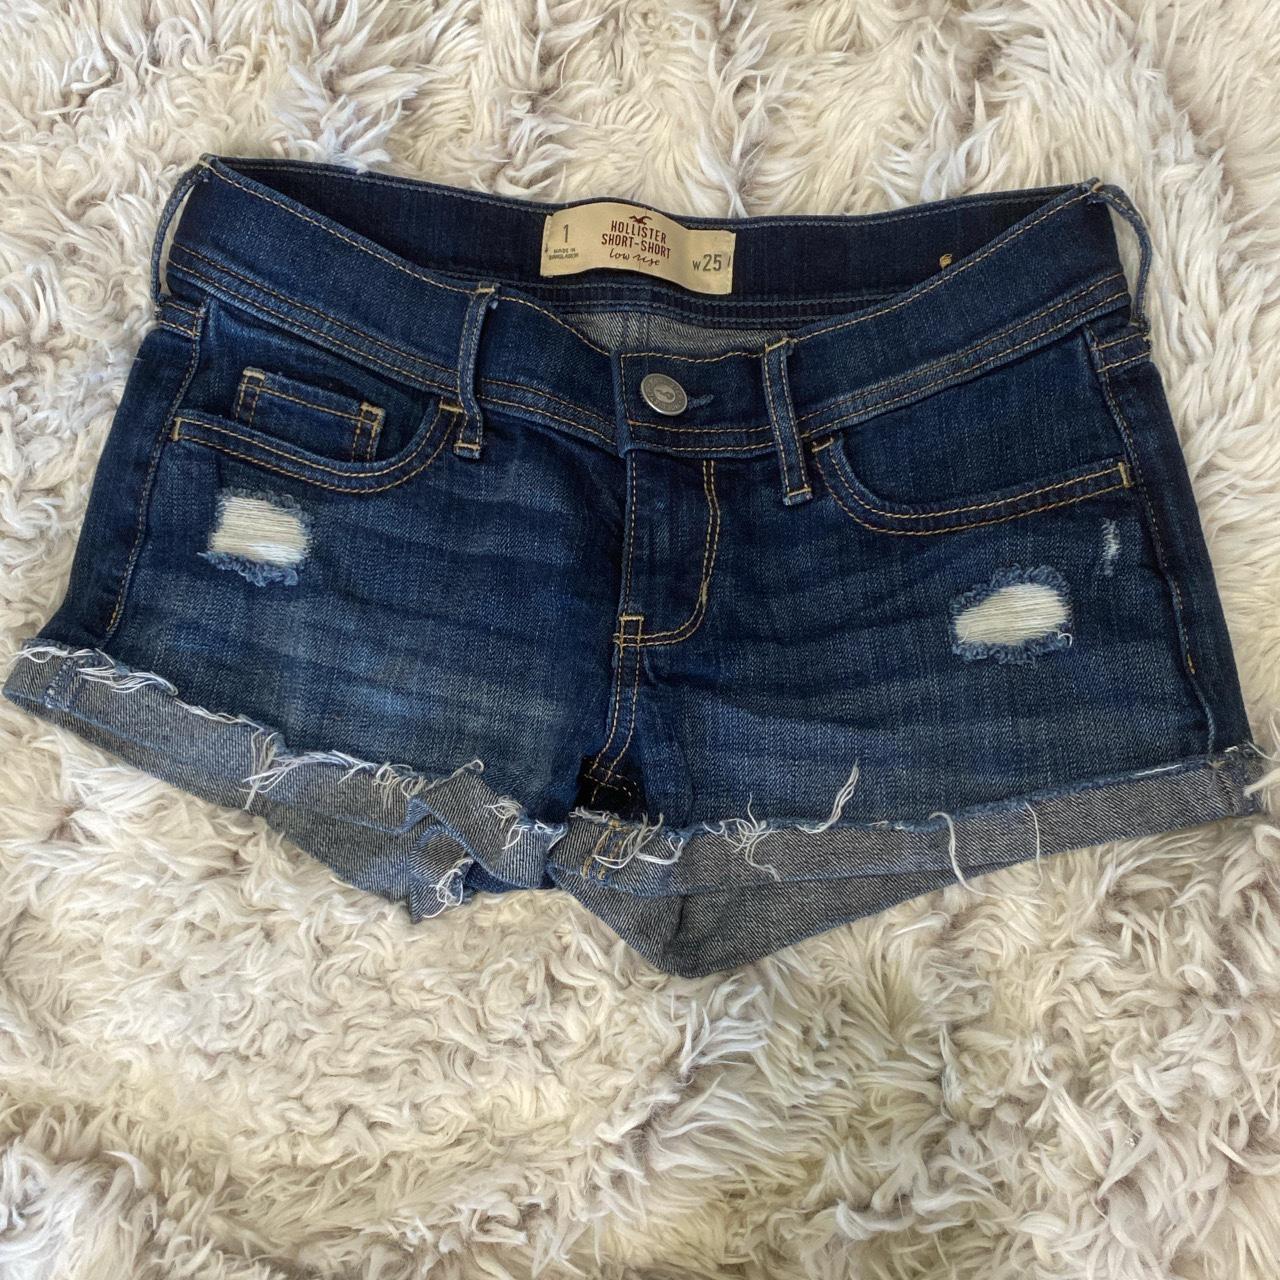 low rise denim shorts super cute but too tight on... - Depop